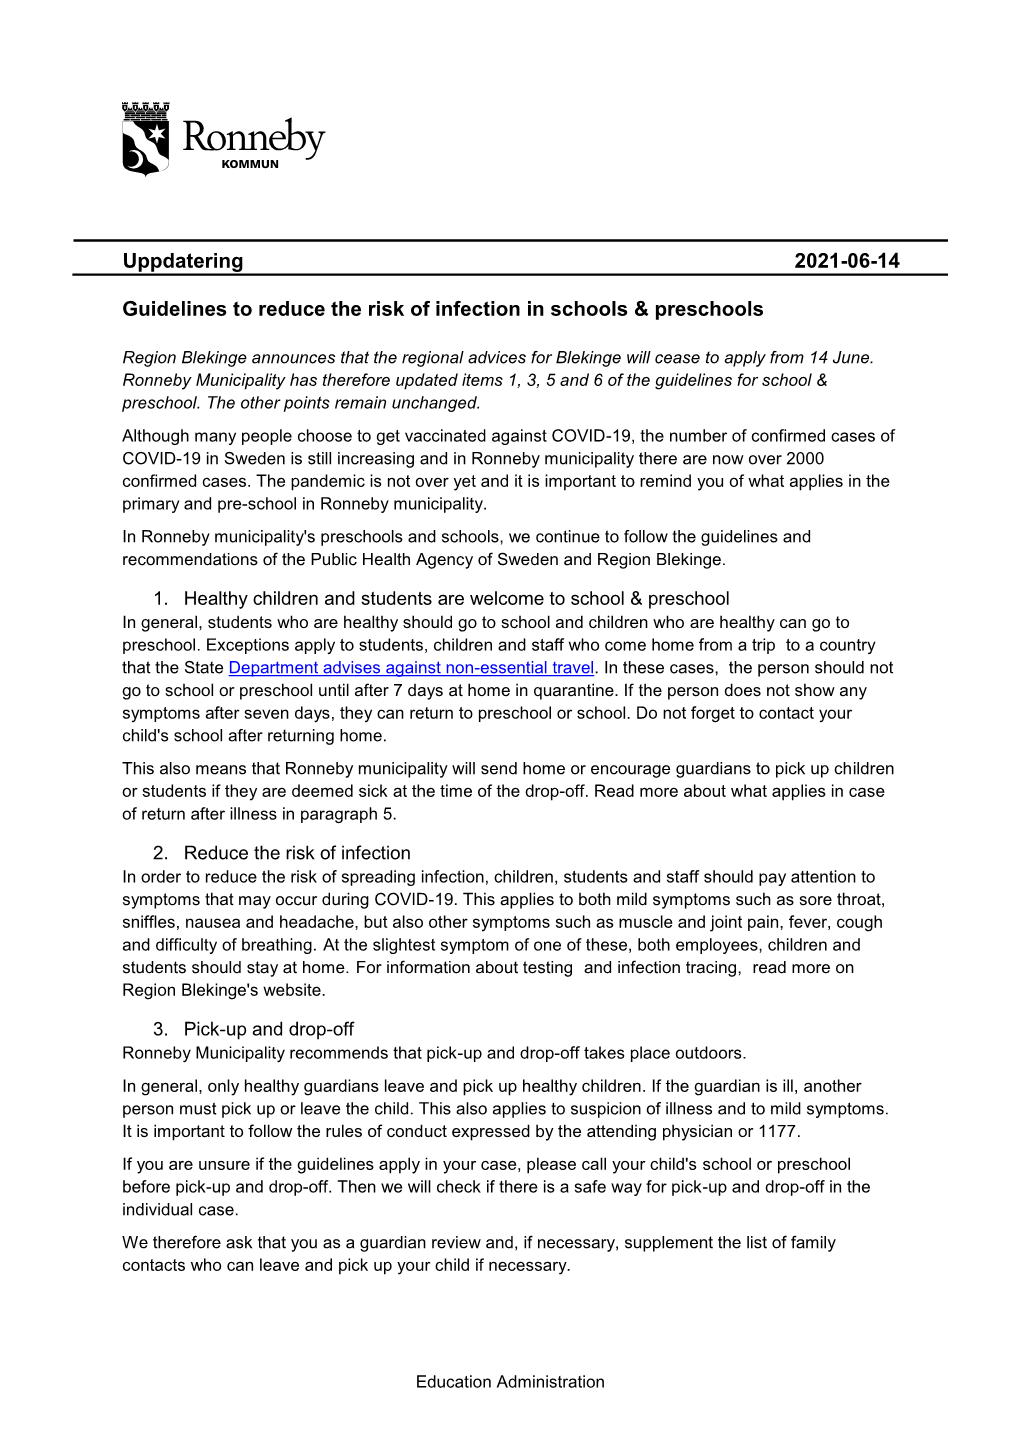 Uppdatering 2021-06-14 Guidelines to Reduce the Risk of Infection In